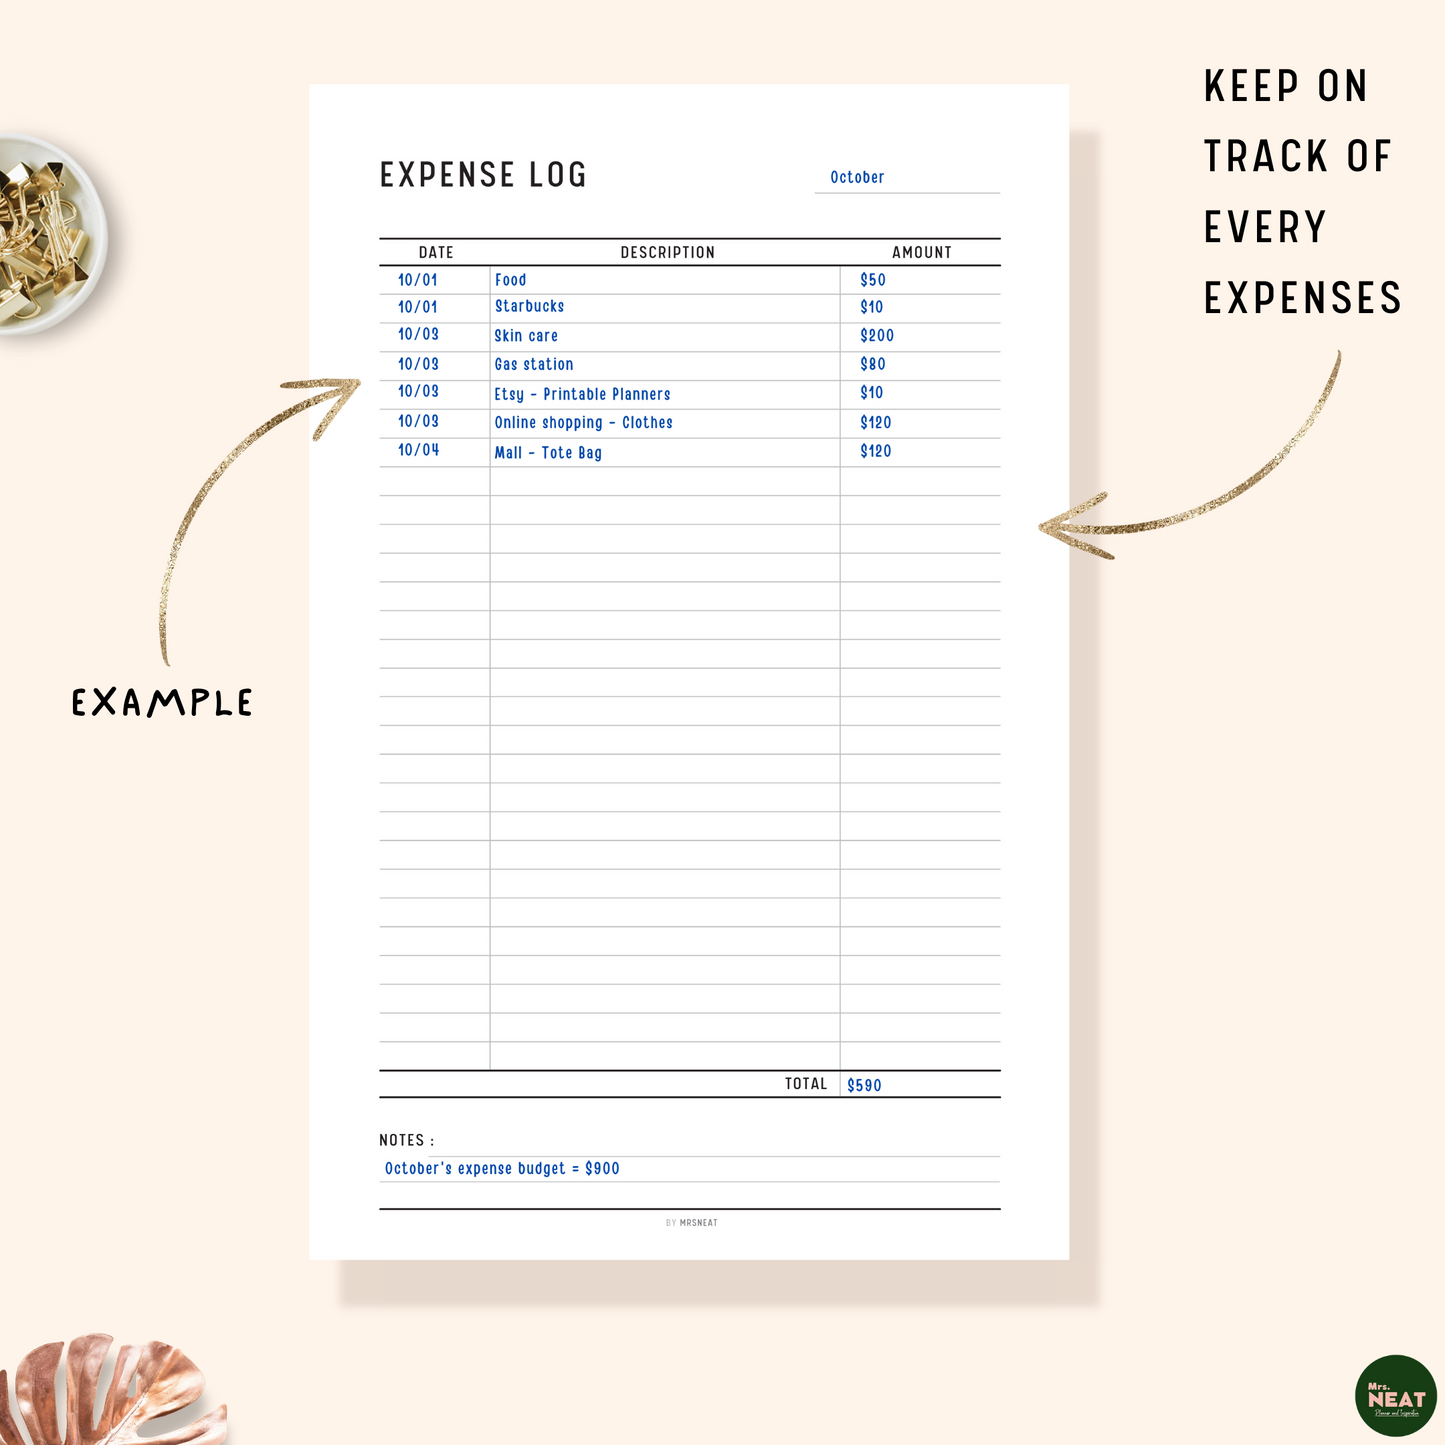 Expense Log Tracker Printable Planner with detail list of expenses and notes